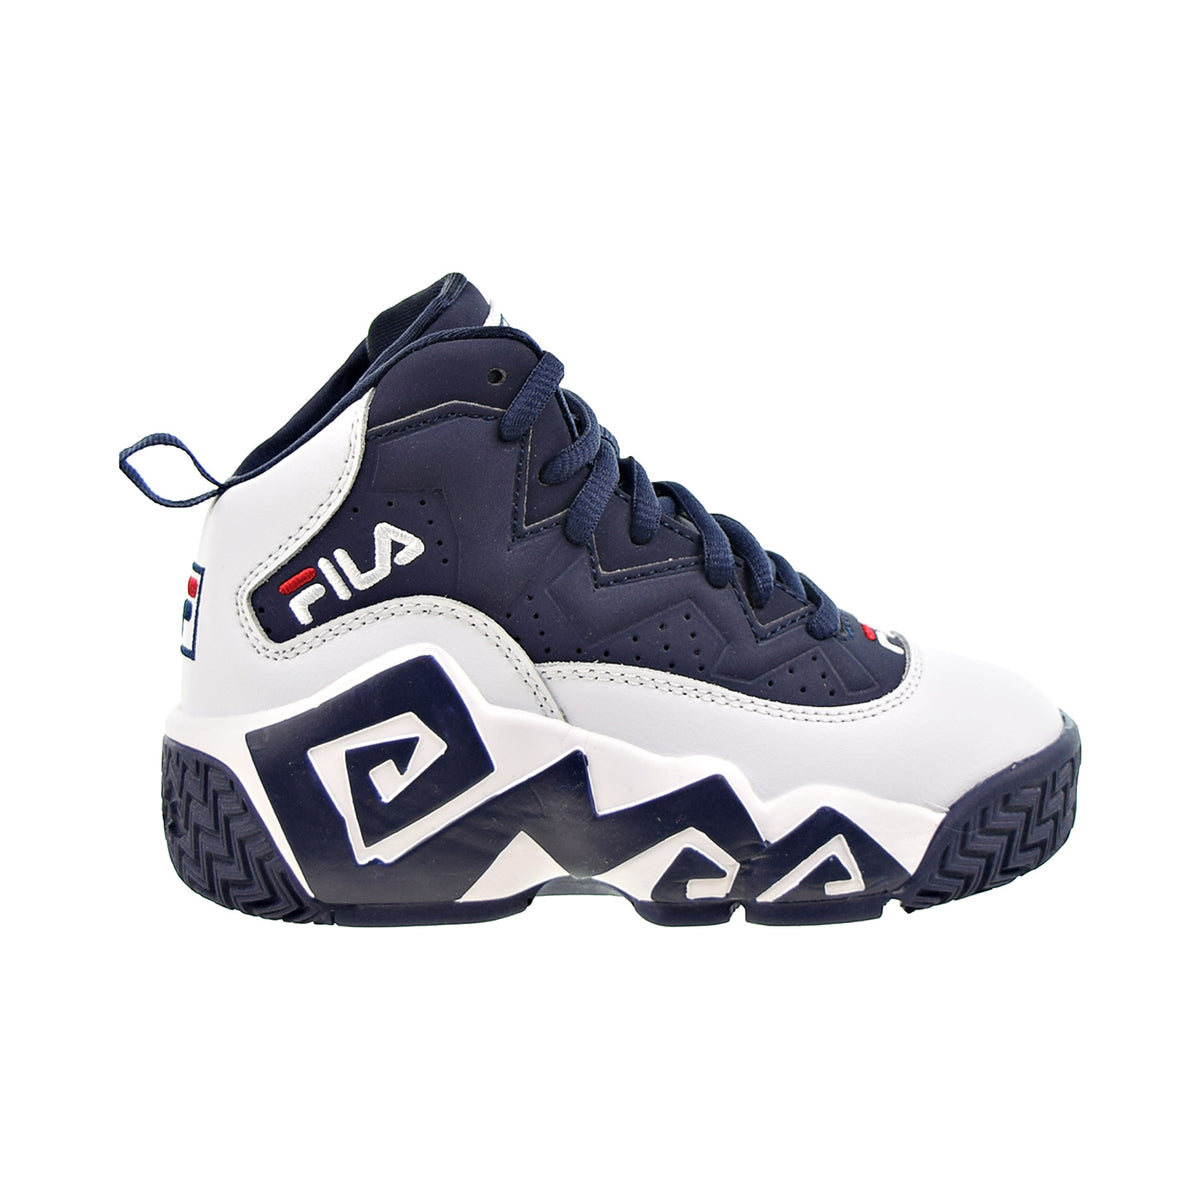 MB Little Kids' Shoes White-Navy-Red